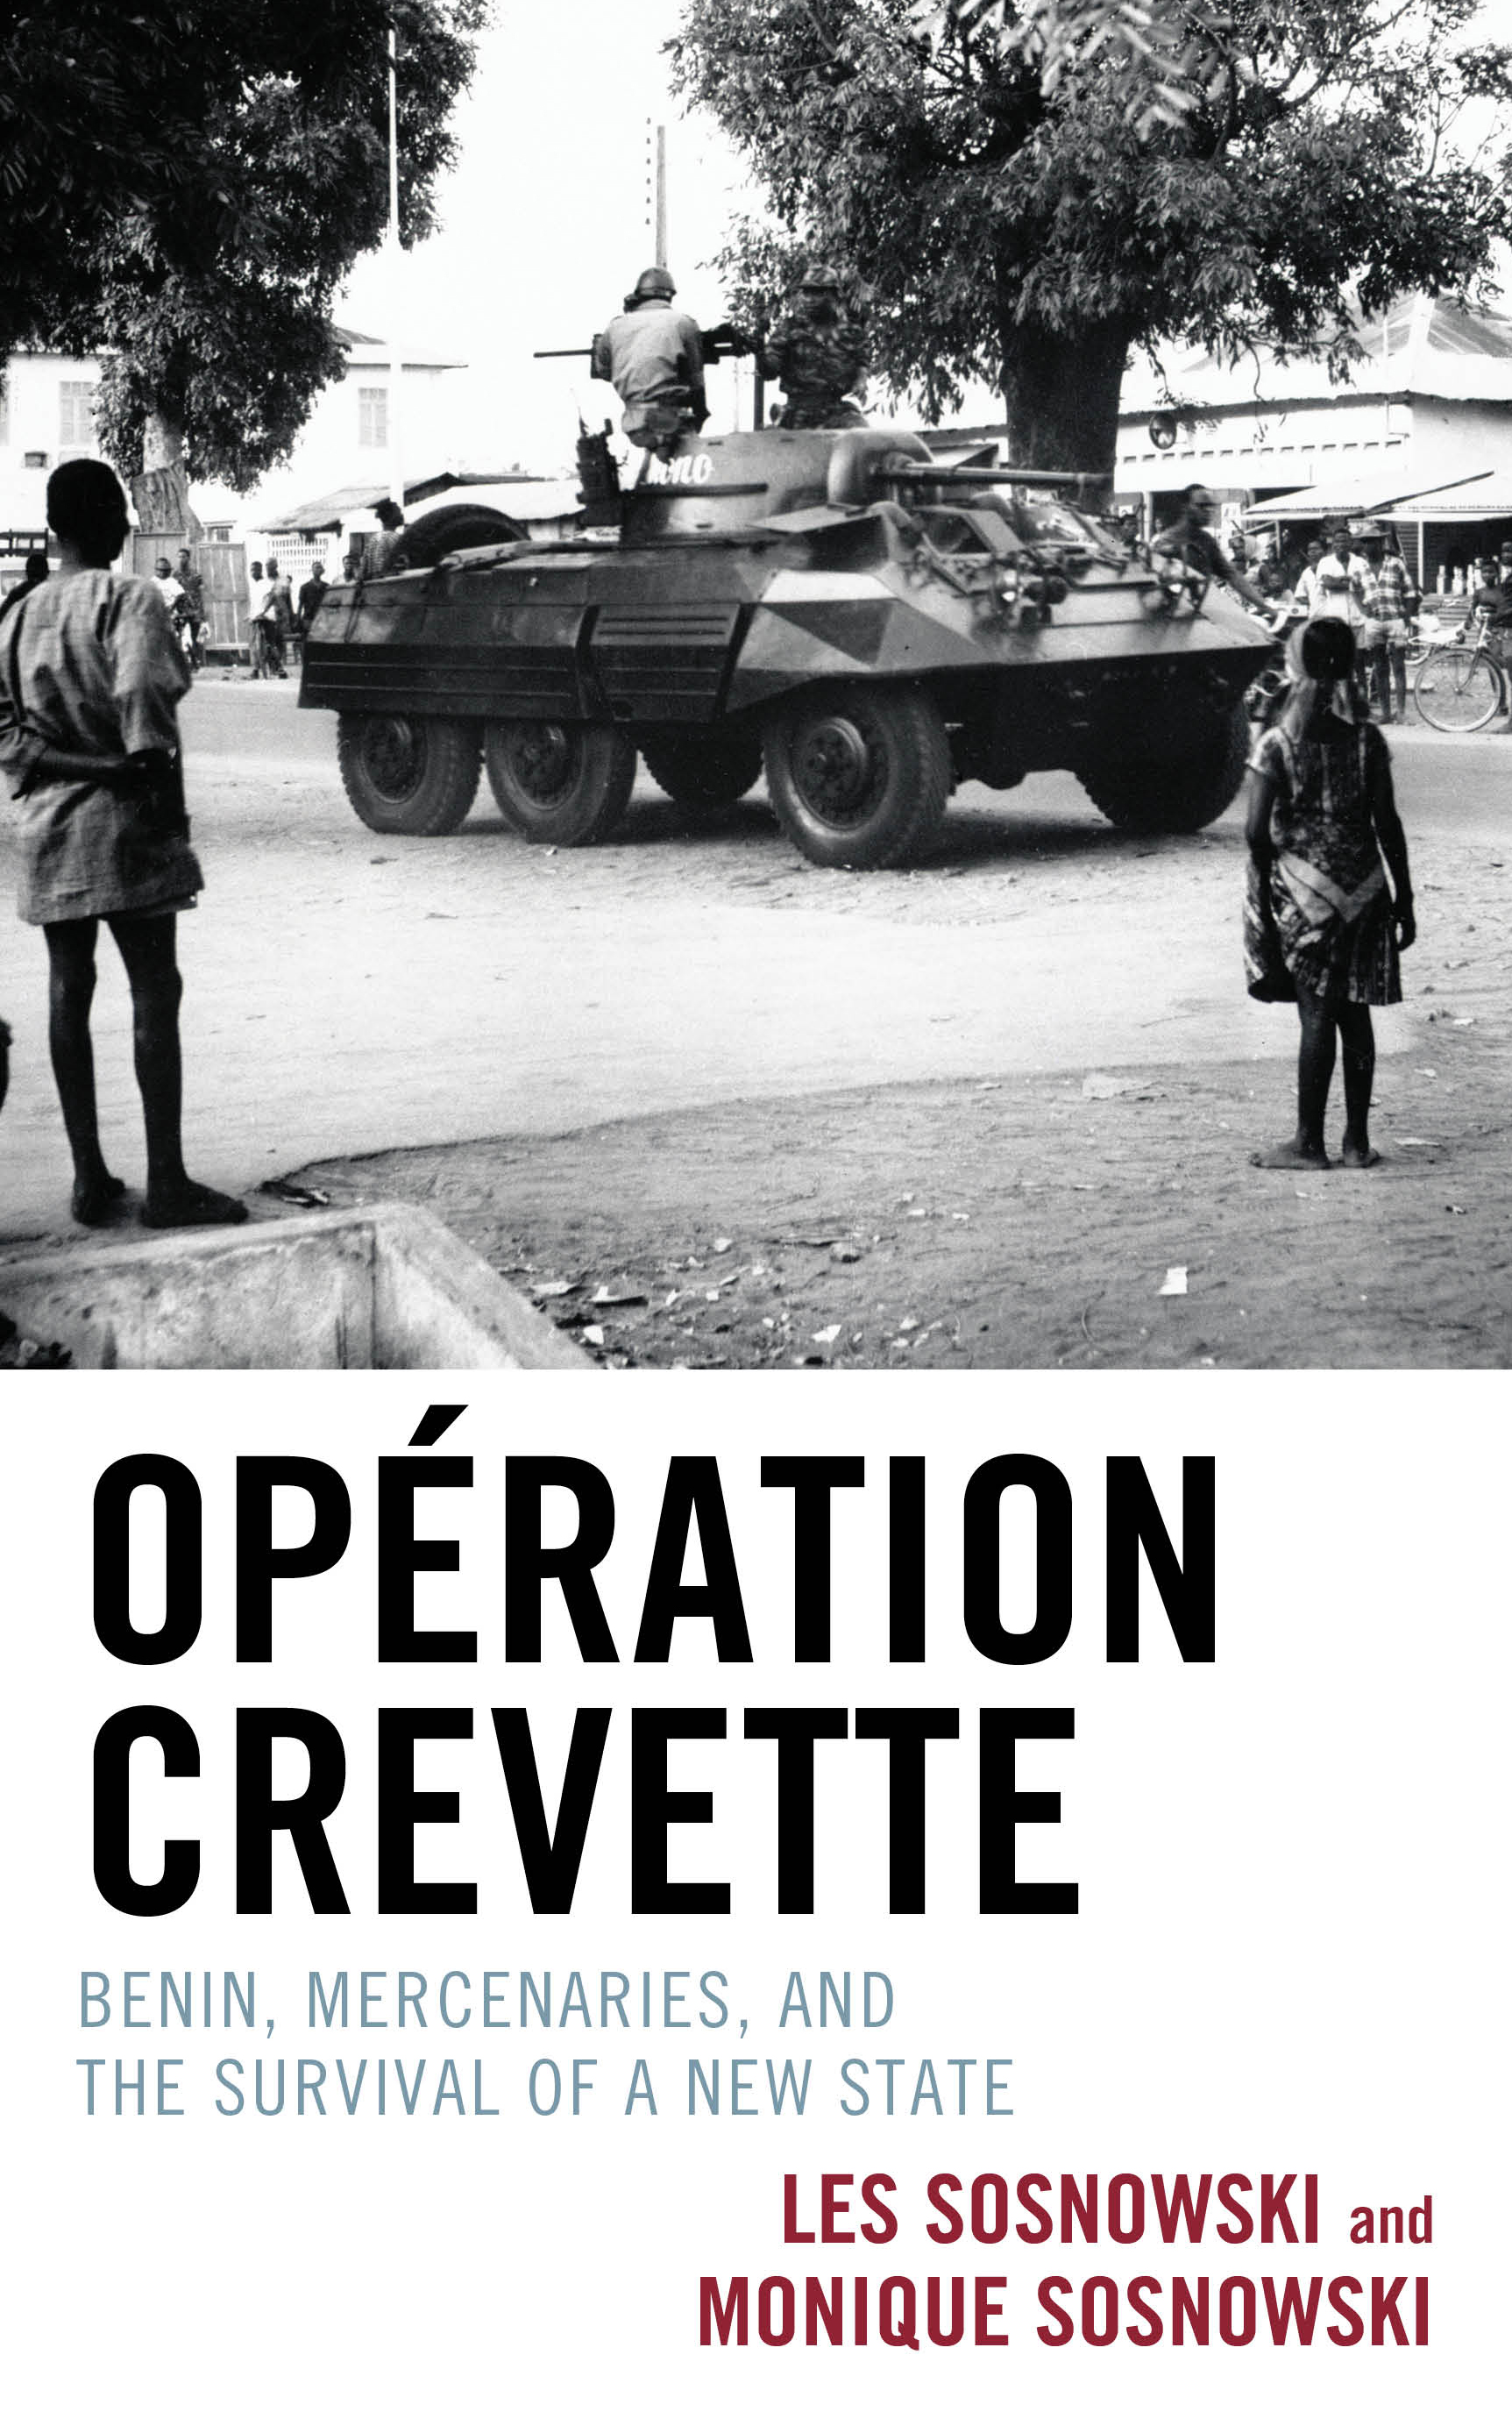 Opération Crevette: Benin, Mercenaries, and the Survival of a New State